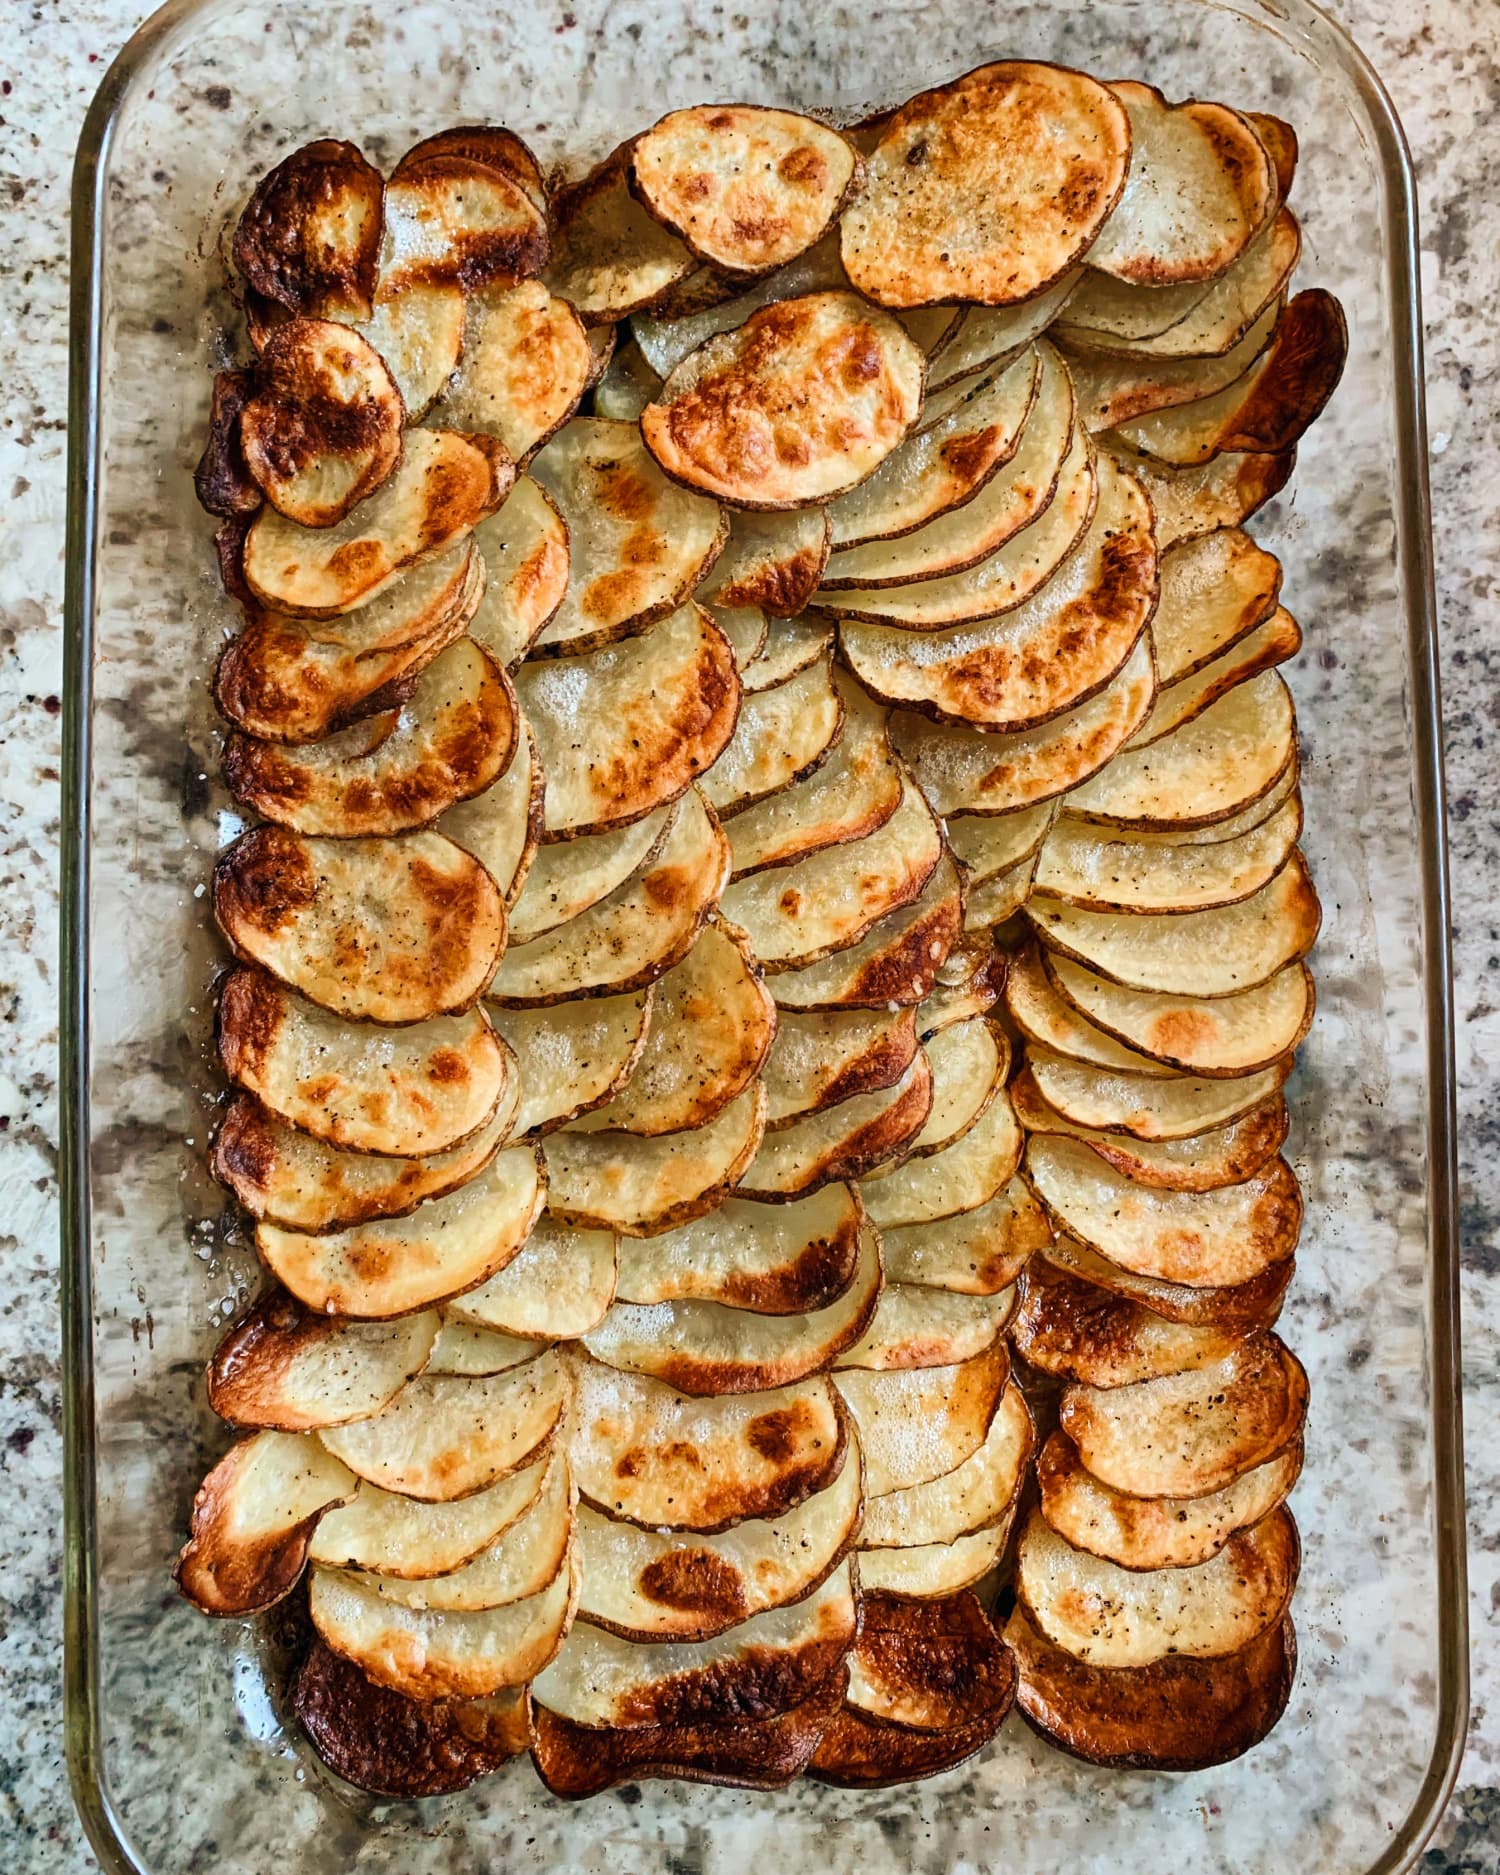 My Sister-in-Law’s “Skinny Potatoes” Are the Ridiculously Easy Side Dish You Need